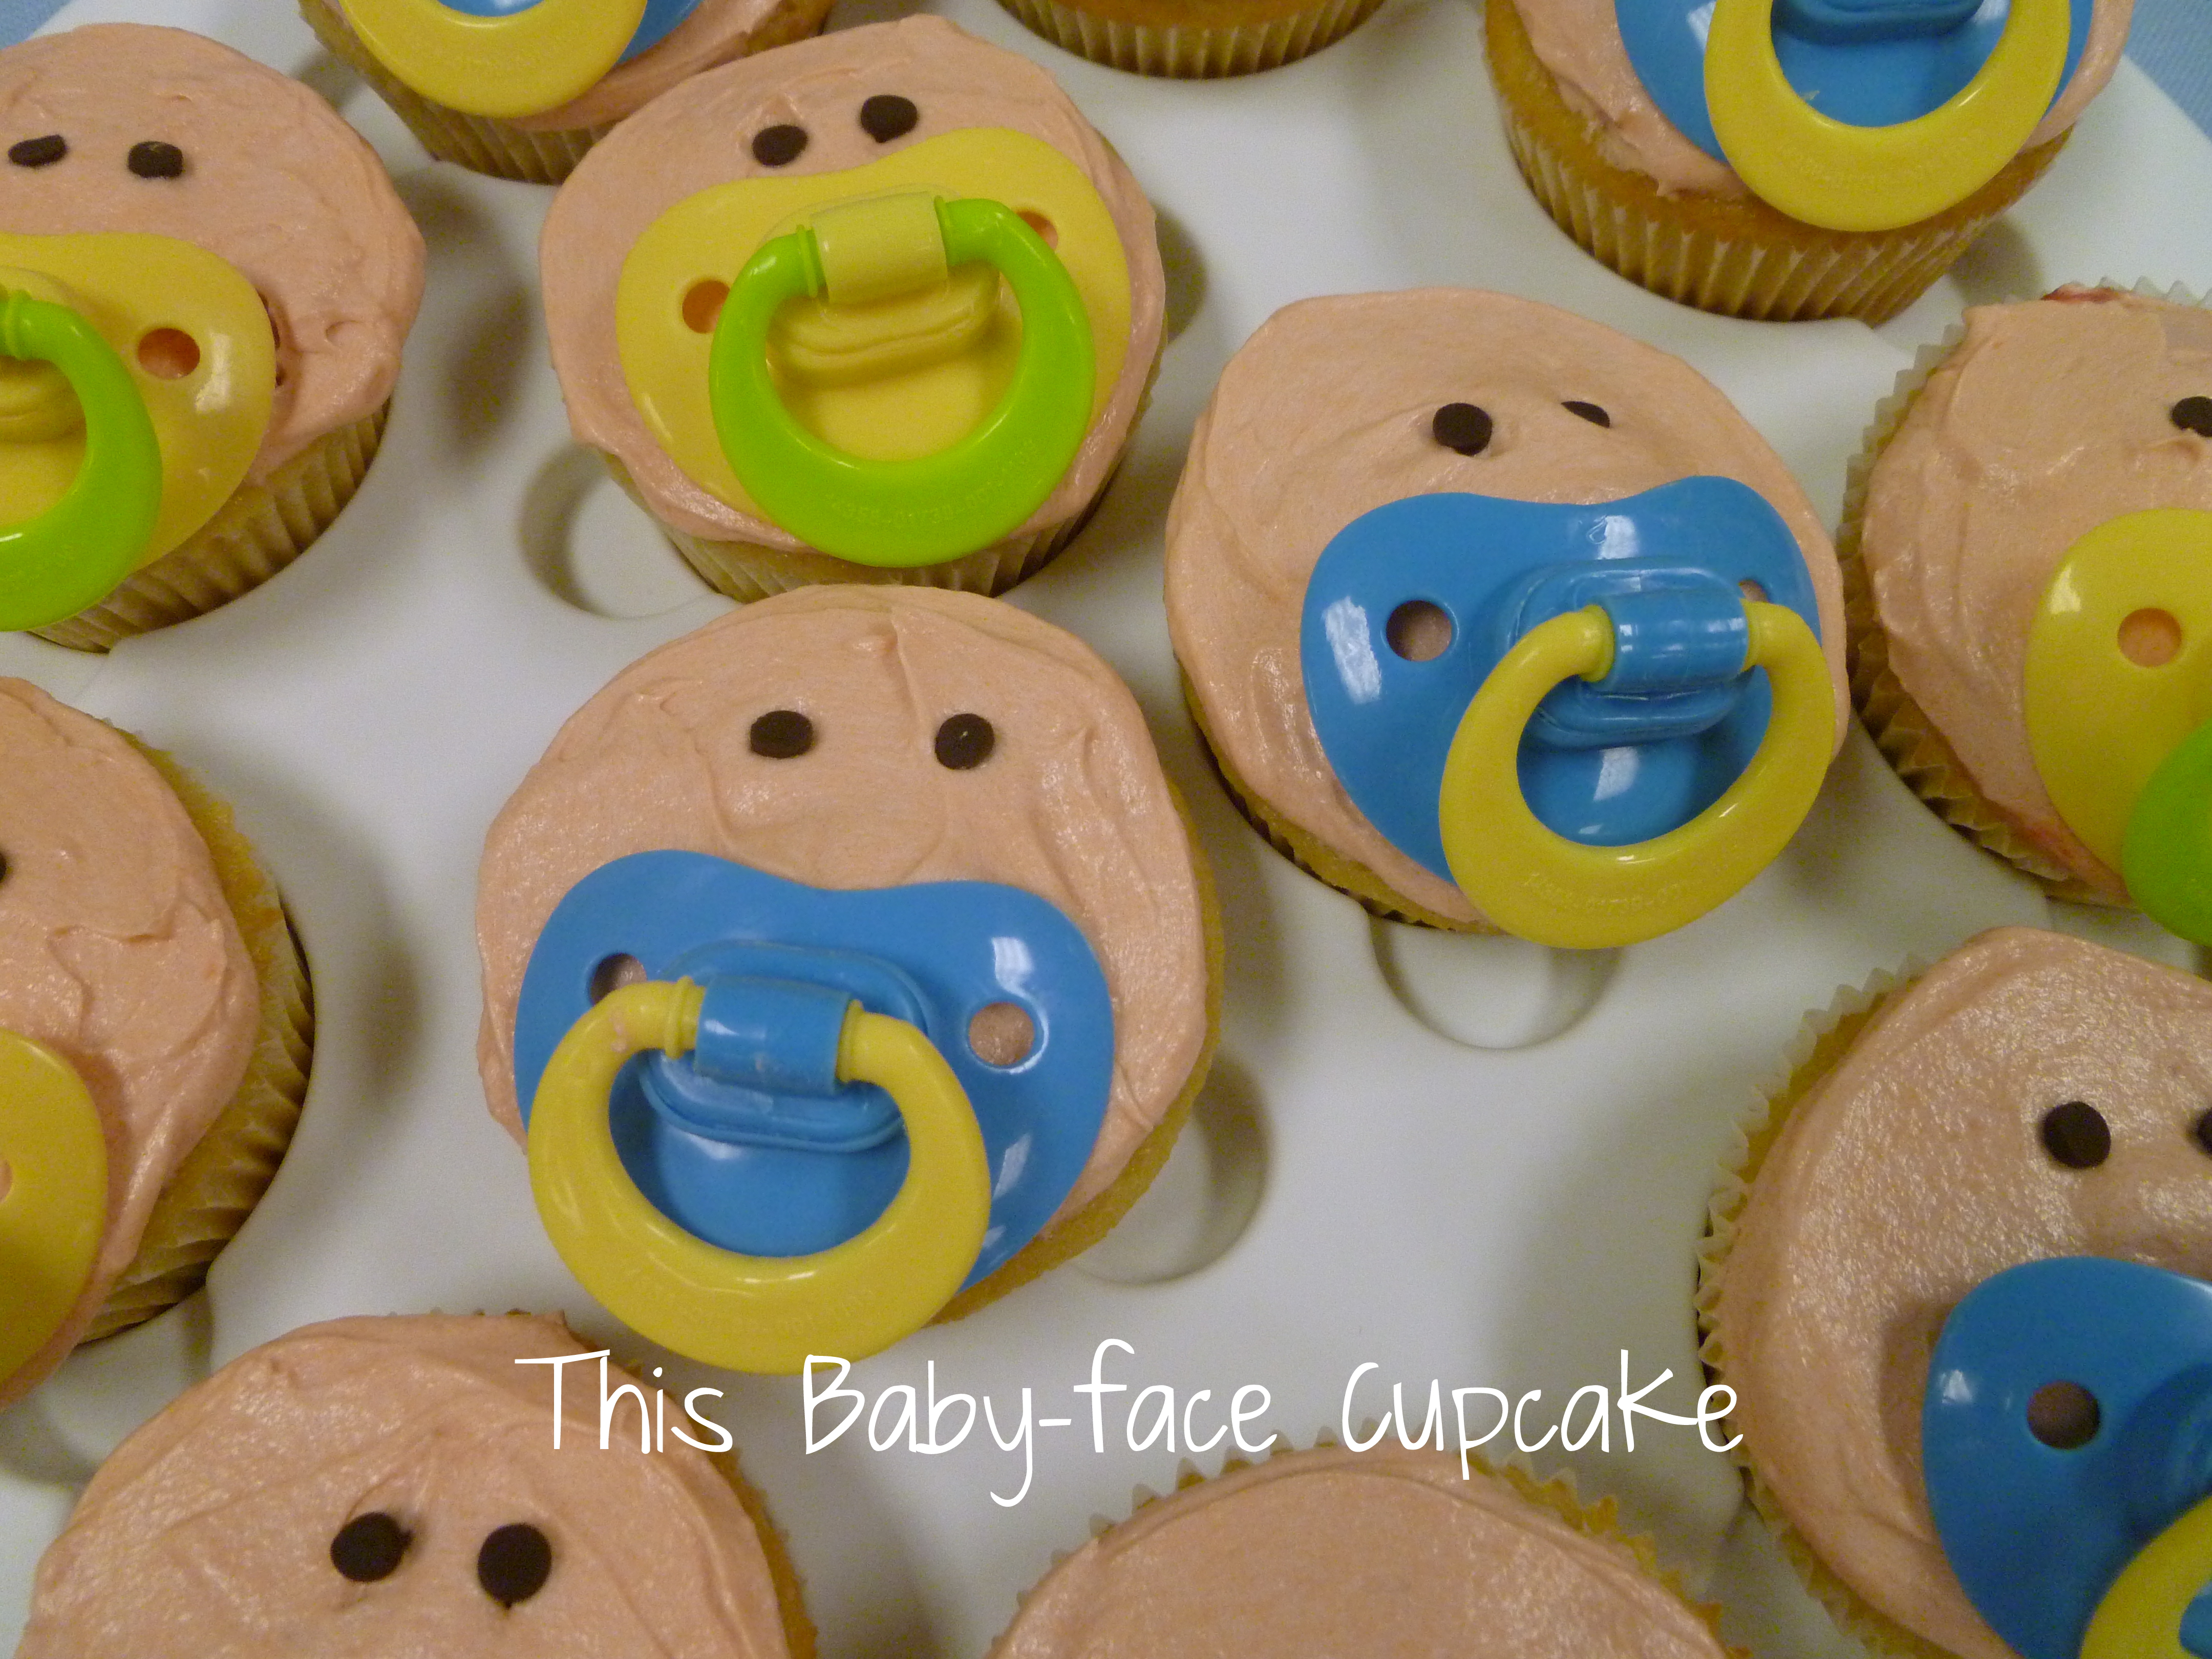 Baby Face Cupcakes with Pacifier